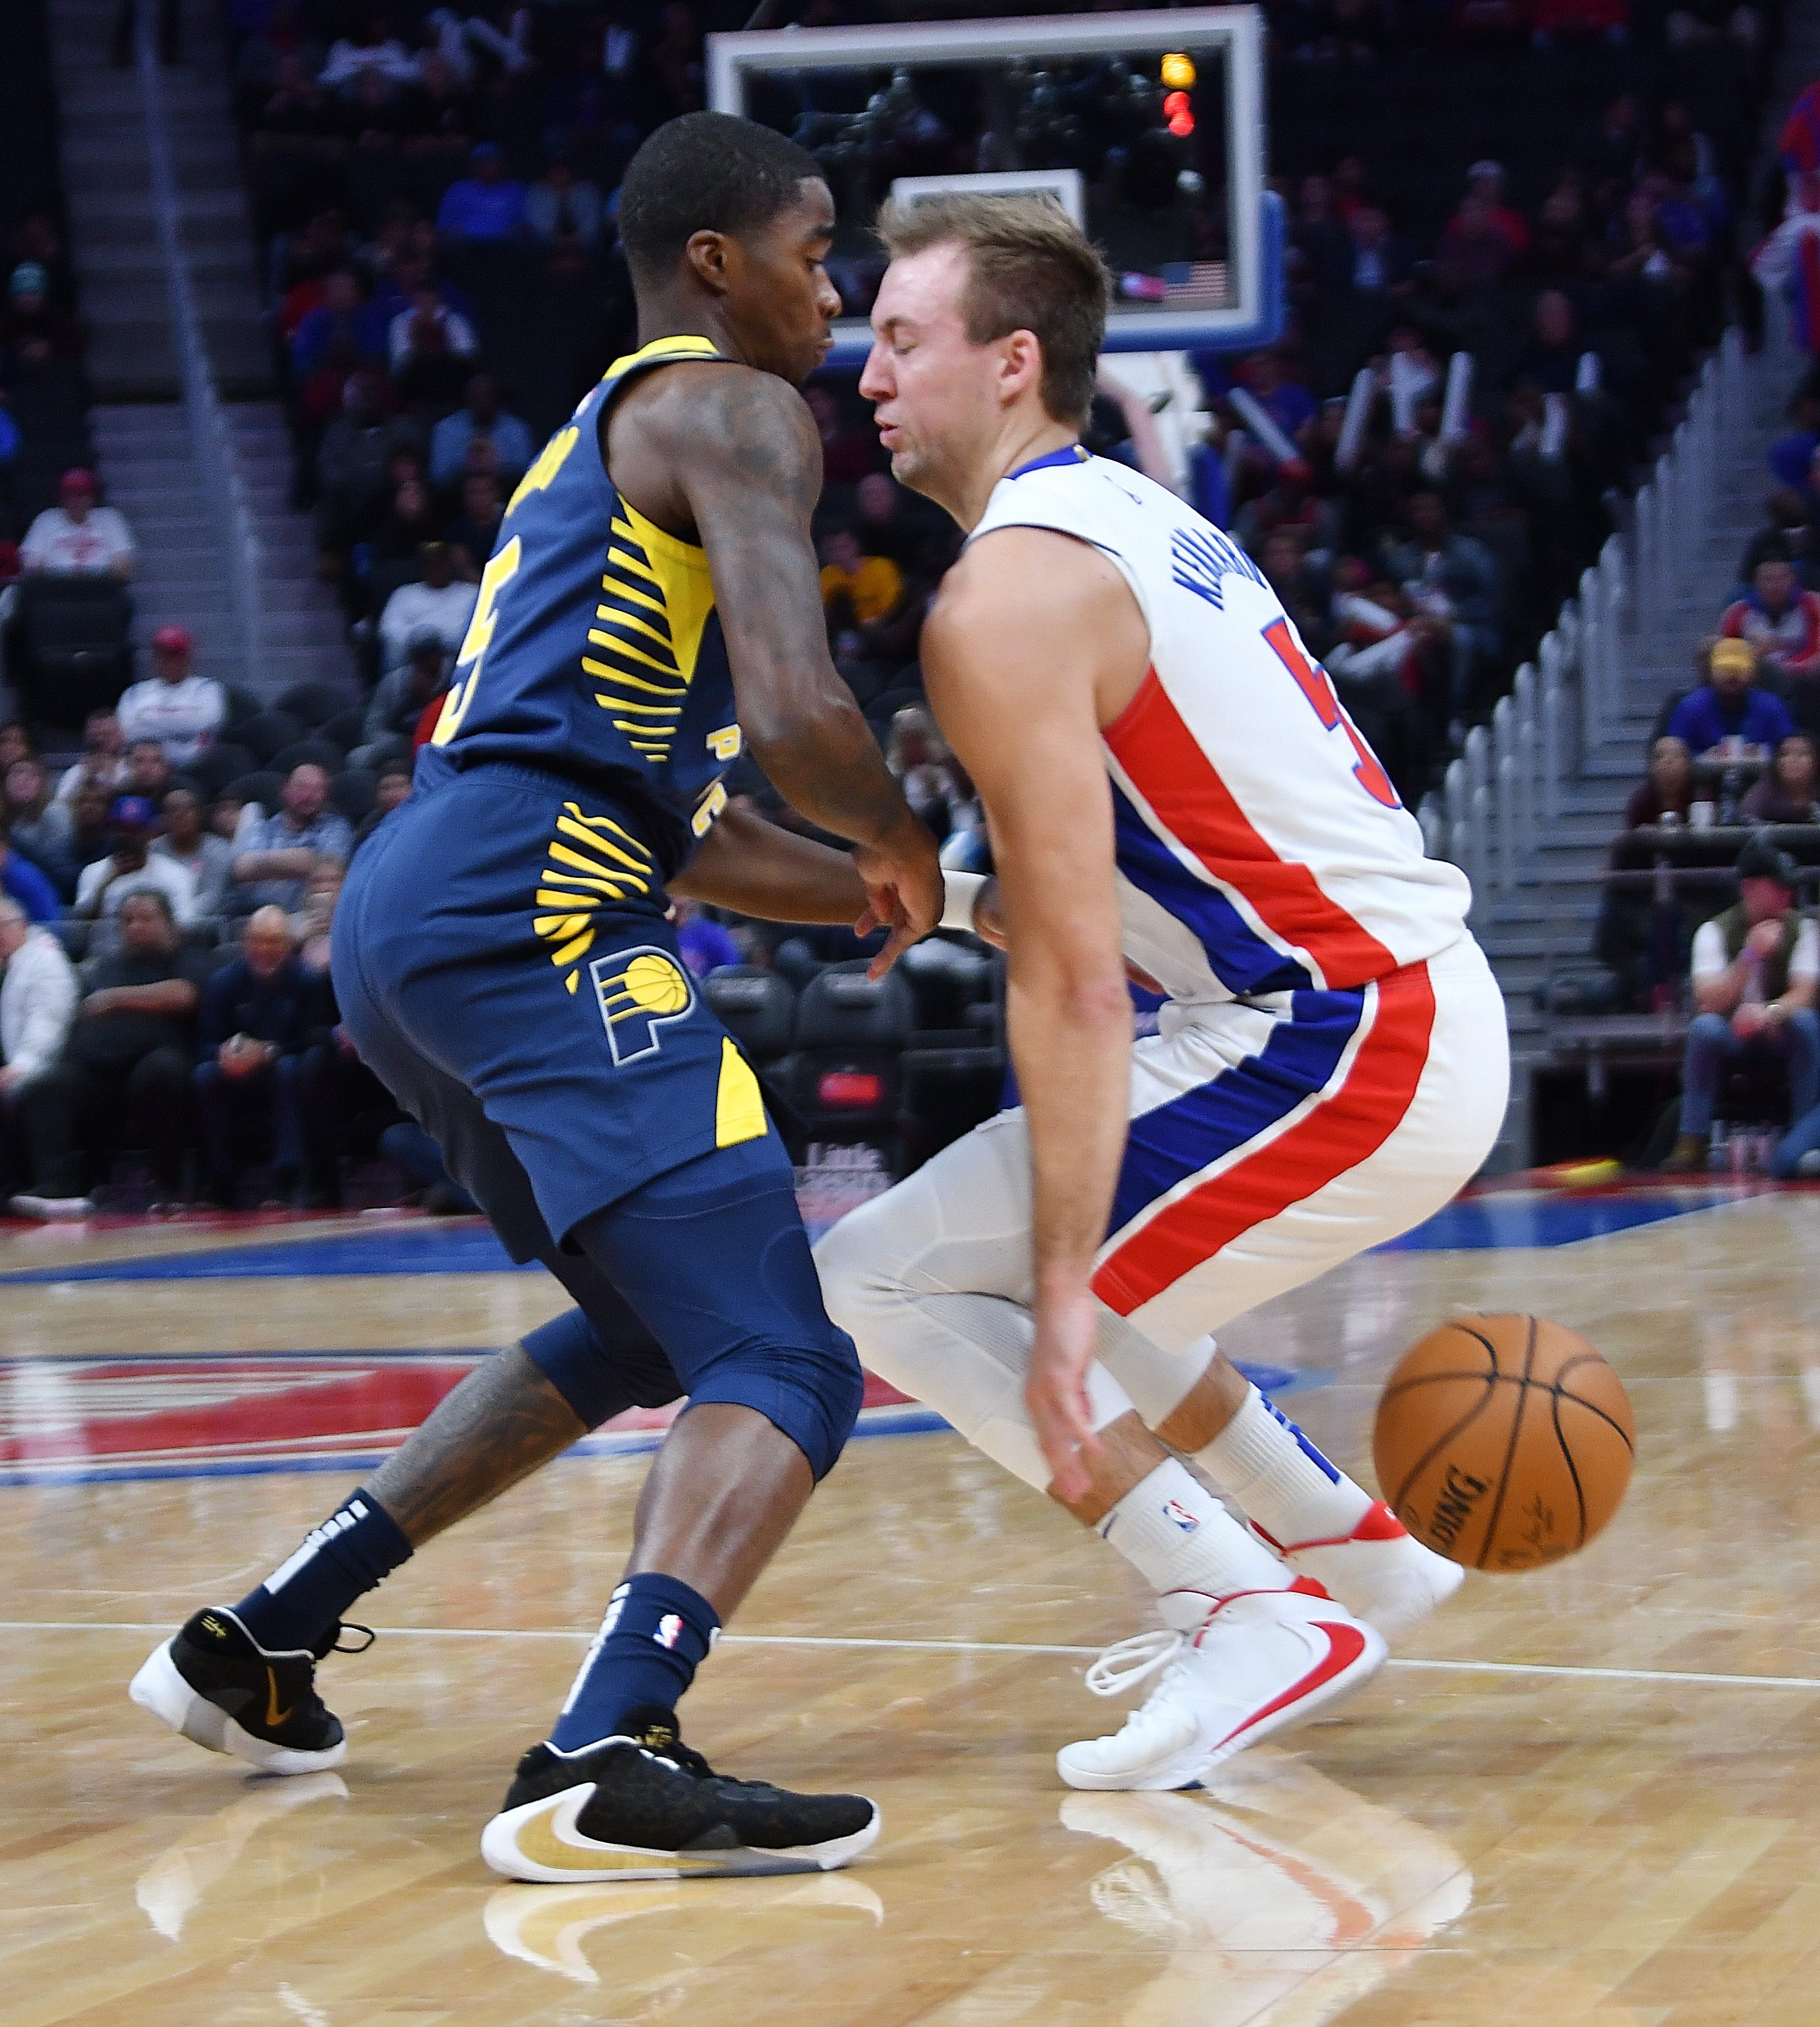 Pistons' Luke Kennard loses the ball for a turnover in the first quarter as Pacers' Edmond Sumner defends on the play. The Detroit Pistons host the Indiana Pacers at Little Caesars Arena, Monday night, October 28, 2019. The Pistons win, 96-94.